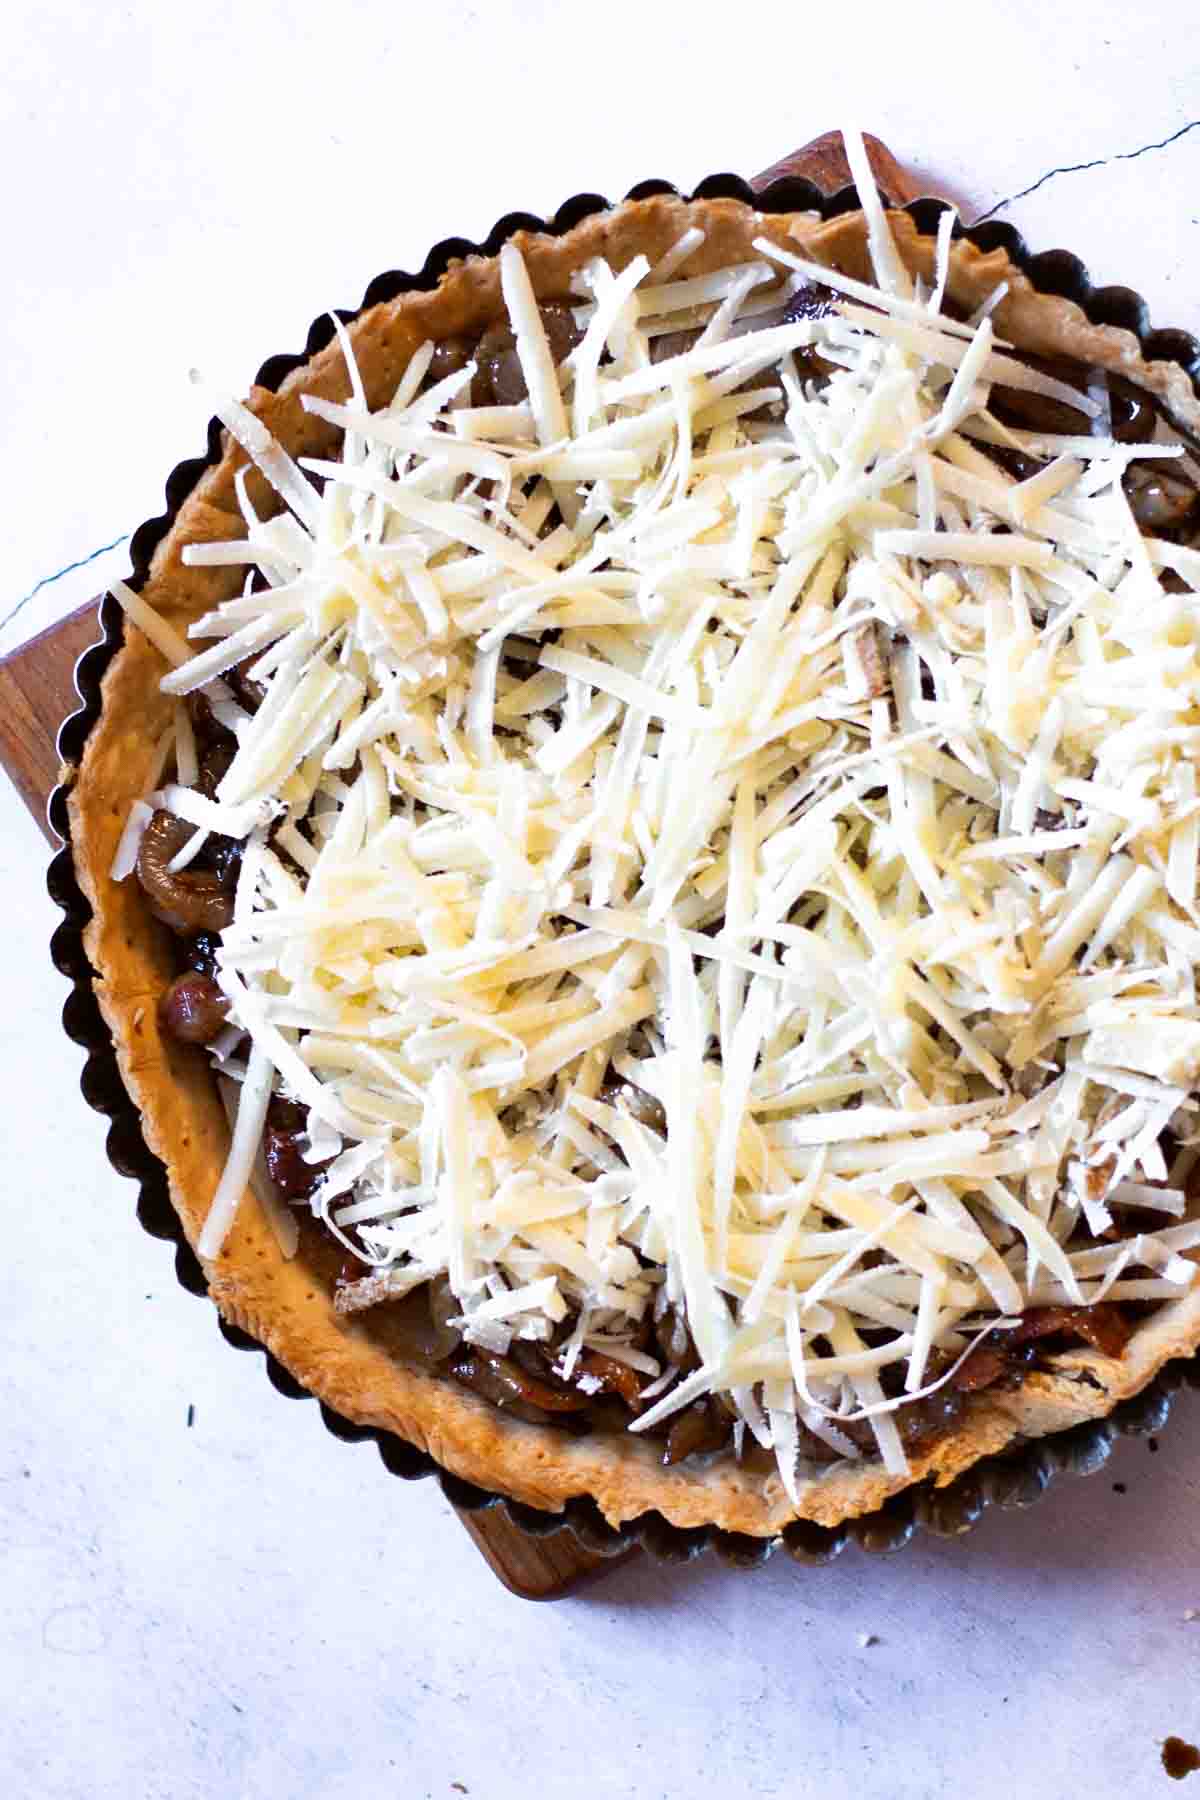 Caramelized onion tart topped with gruyere cheese ready to bake.